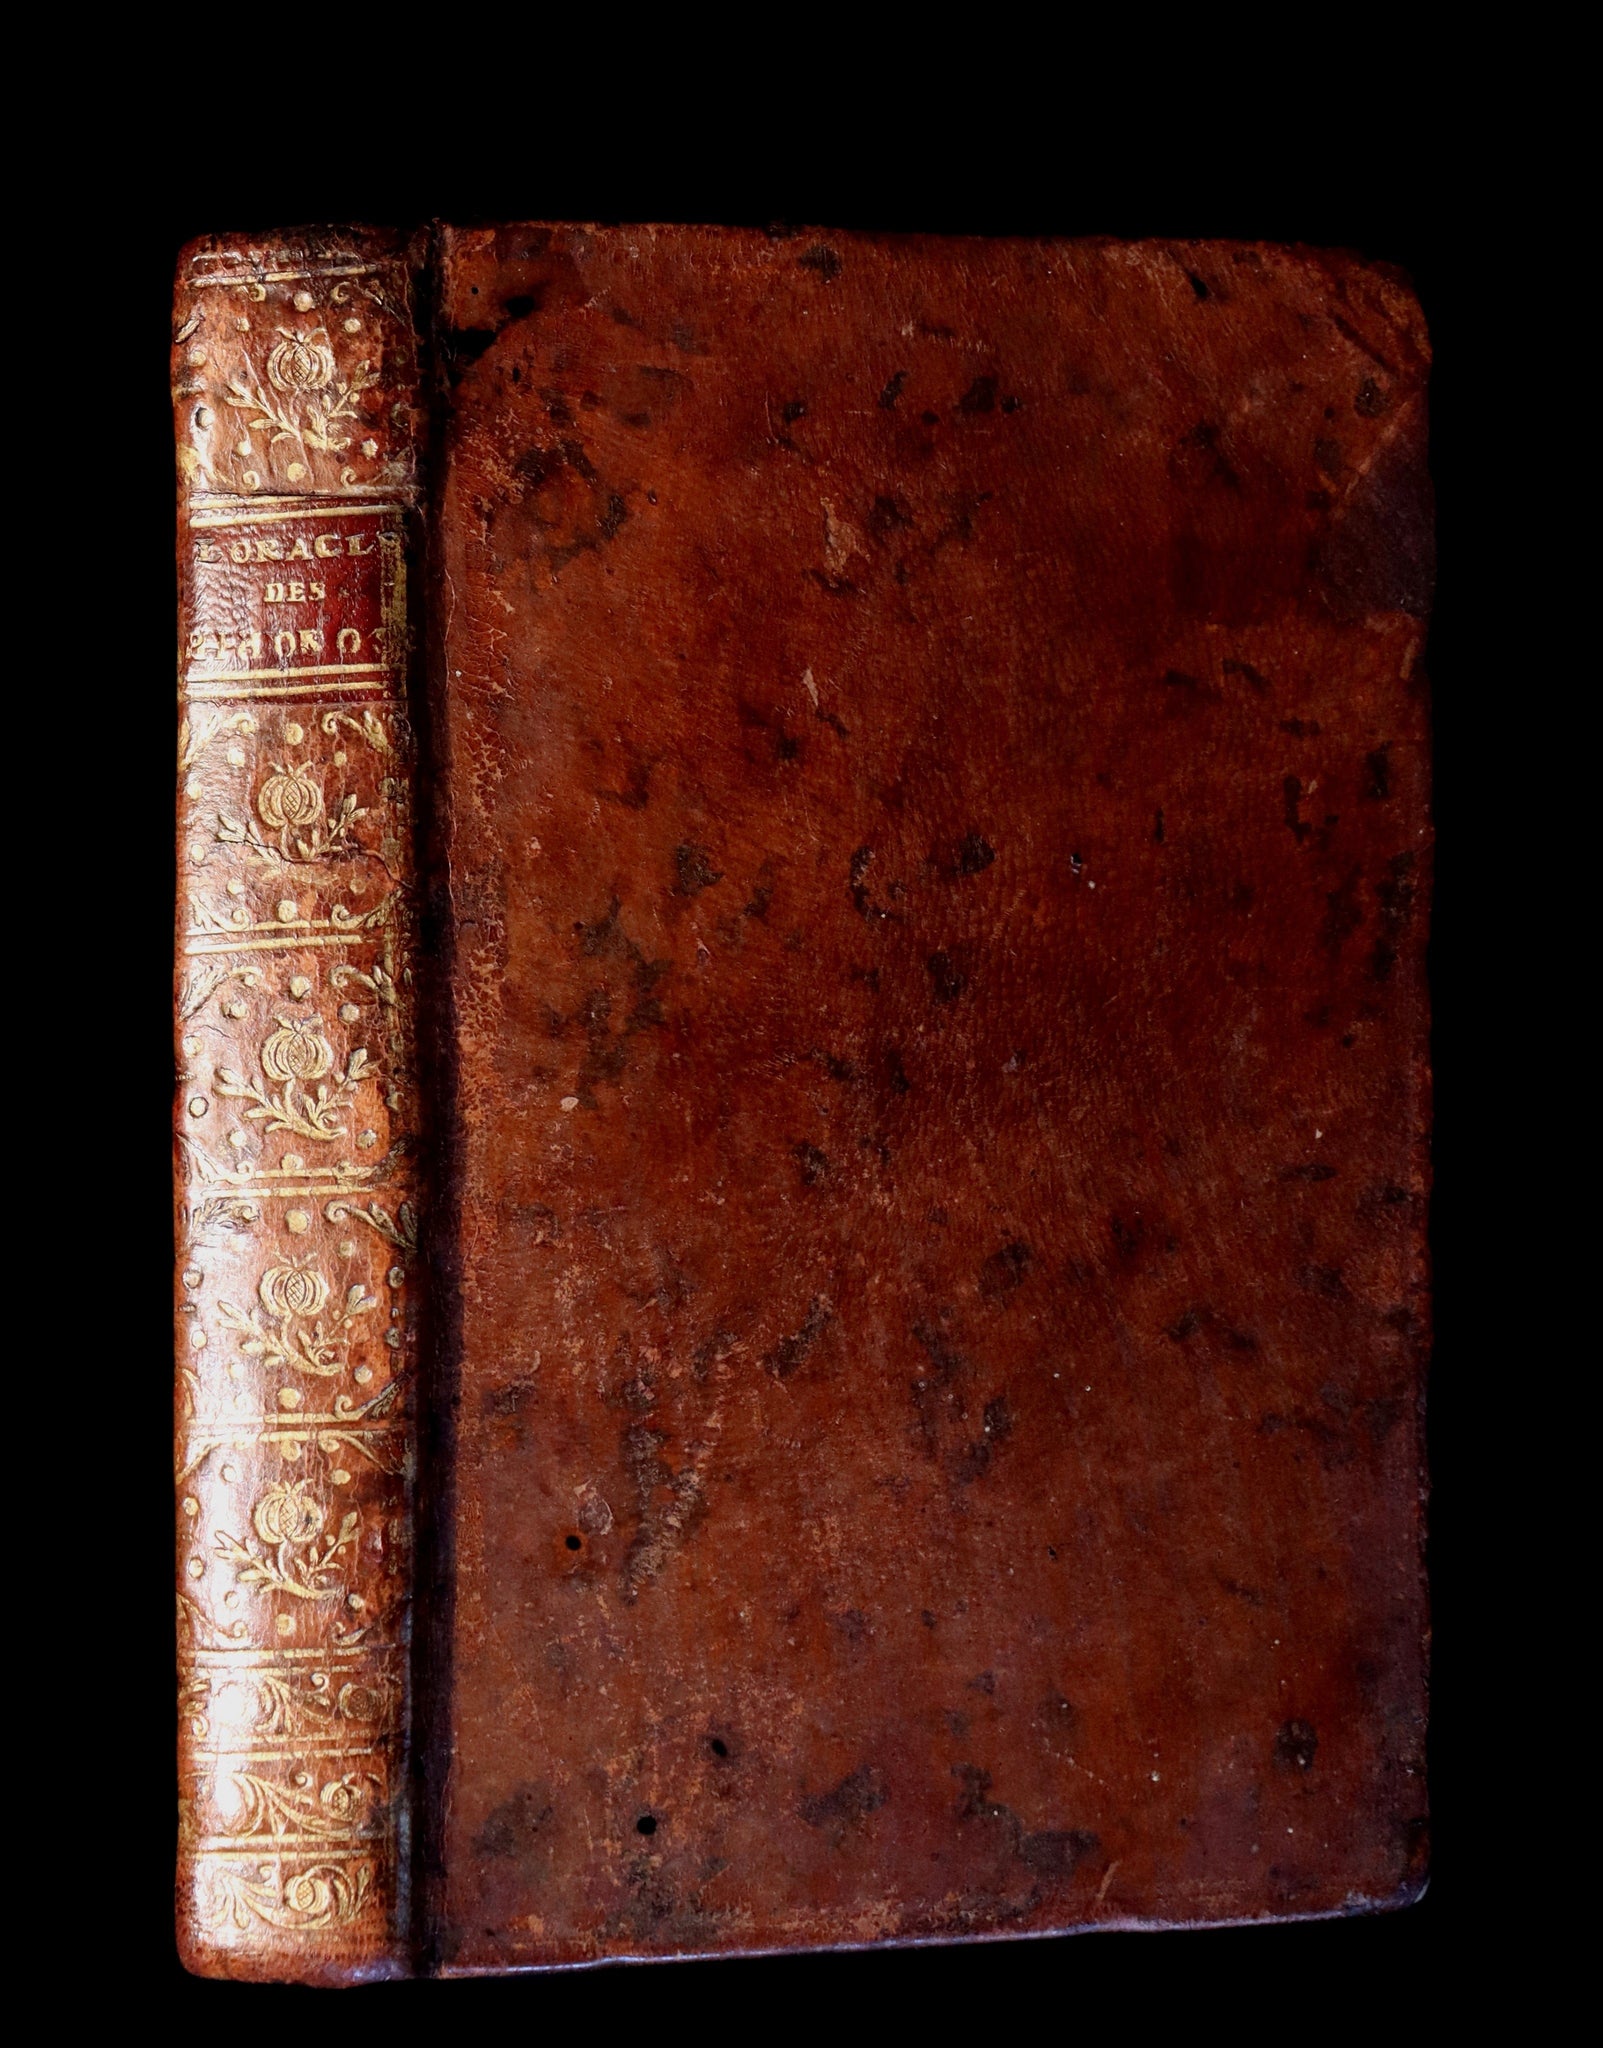 1759 Rare French 1stED - The Oracle of New Philosophers - L'Oracle des Nouveaux Philosophes by l'Abbé Guyon on Voltaire.